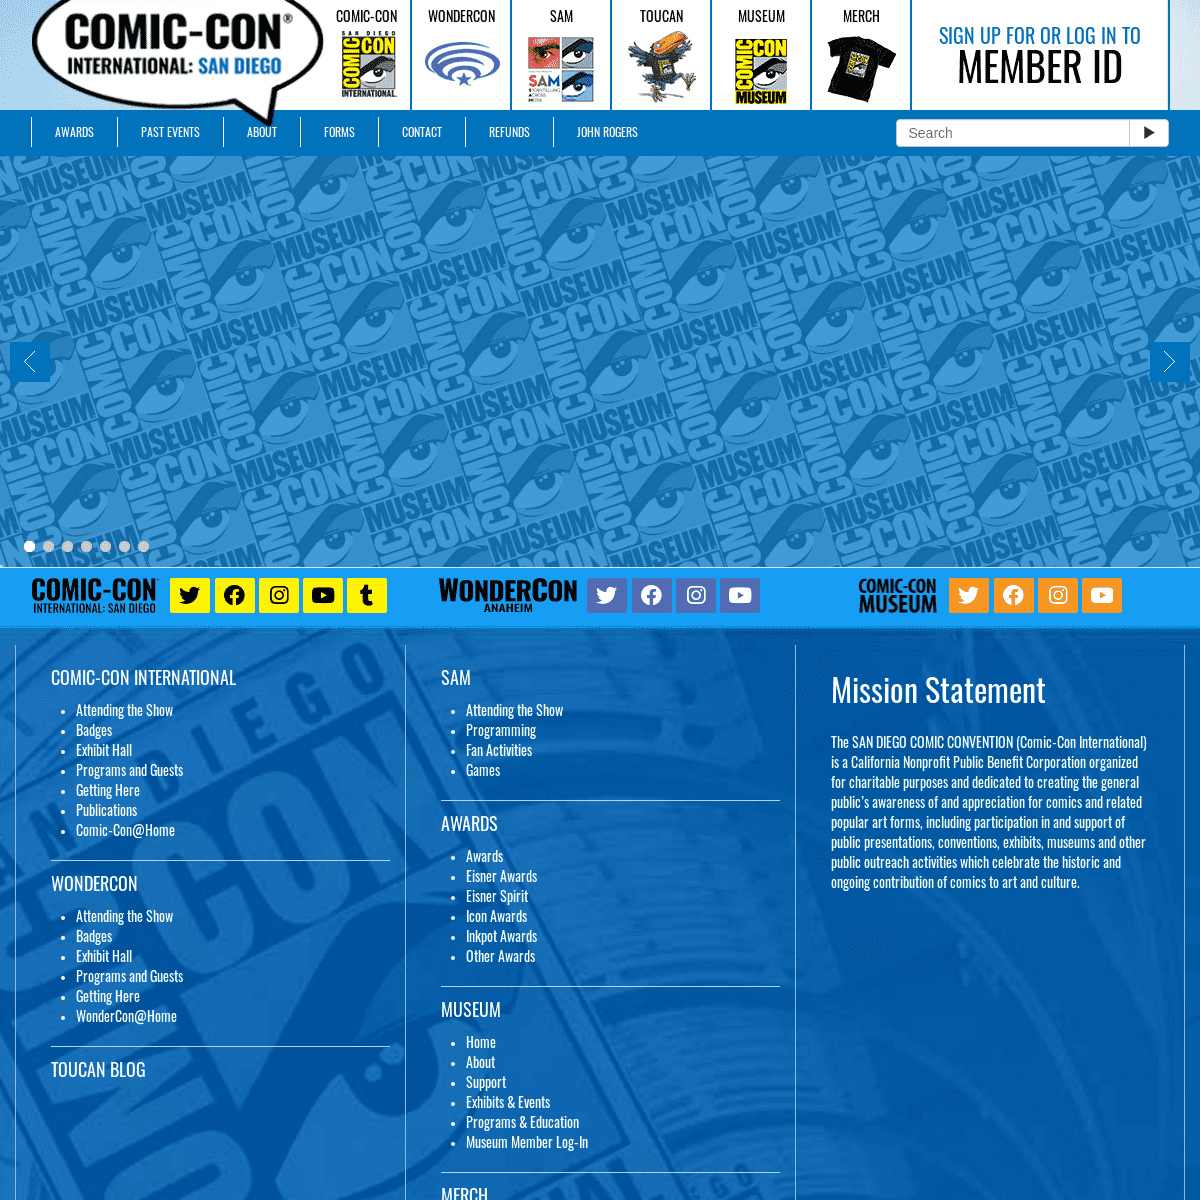 A complete backup of https://comic-con.org